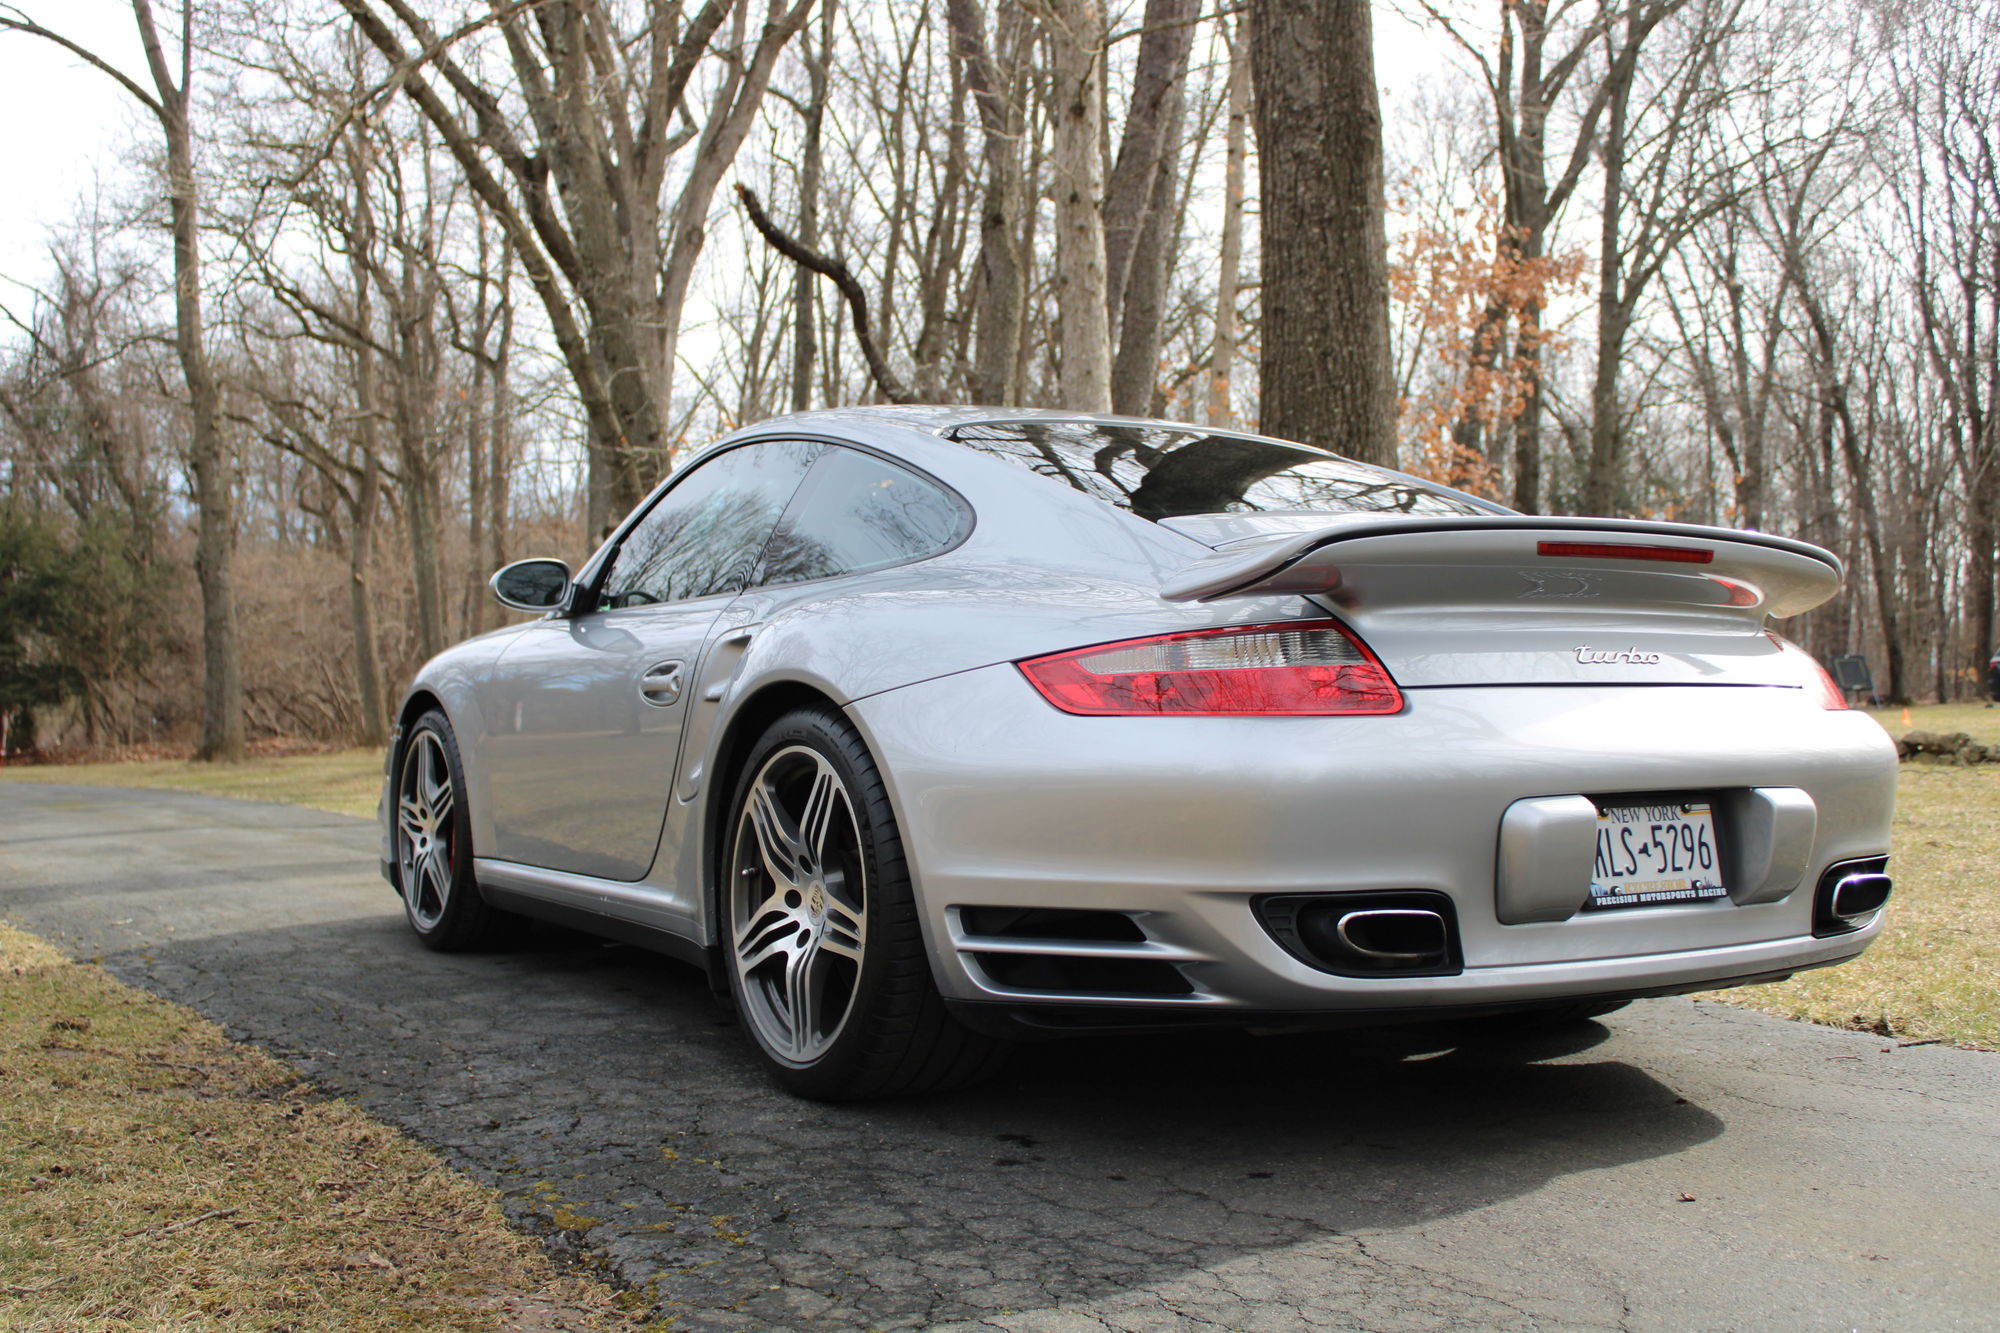 2008 Porsche 911 - 2008 Porsche 997.1 Turbo (6 Speed) GT silver w/ Cocoa brown, 32.8k Miles - Used - VIN wp0ad29938s783501 - 32,800 Miles - 6 cyl - 4WD - Manual - Coupe - Silver - Saint James, NY 11780, United States